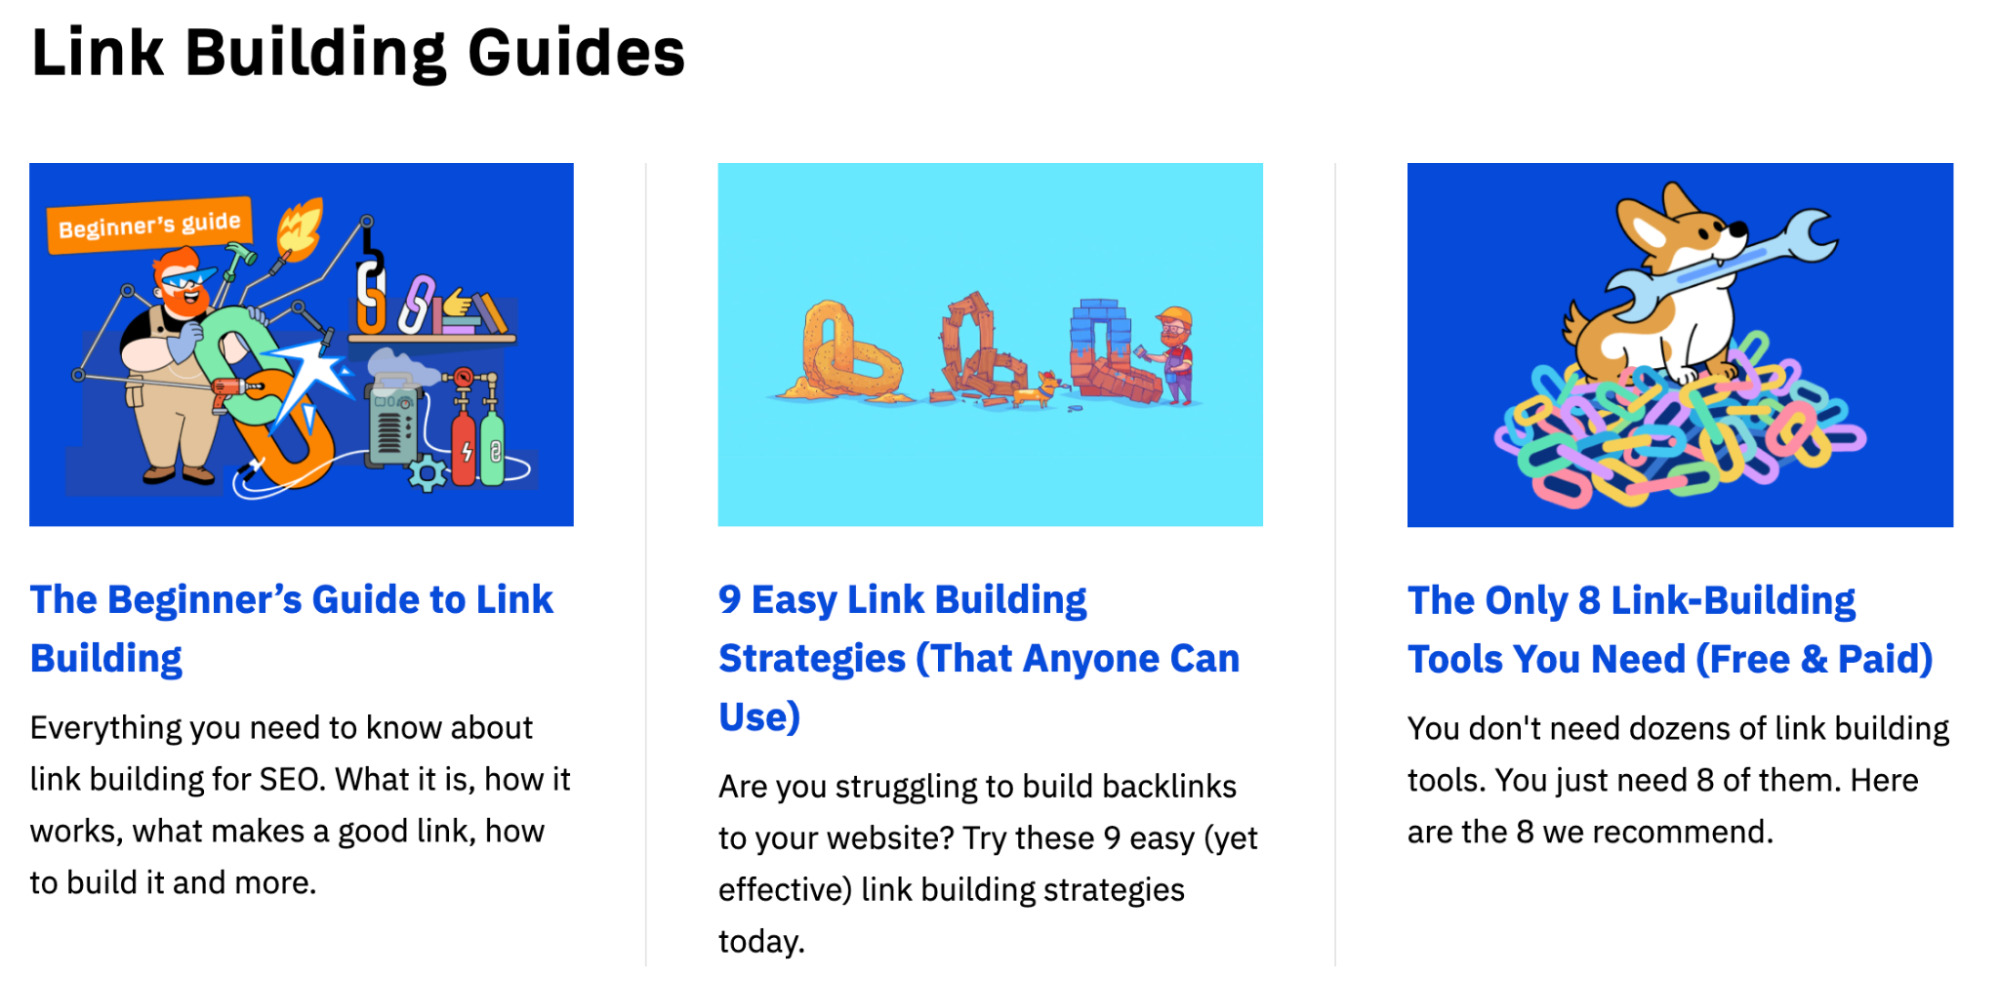 Links to link building guides placed in the footer of a tool for checking backlinks